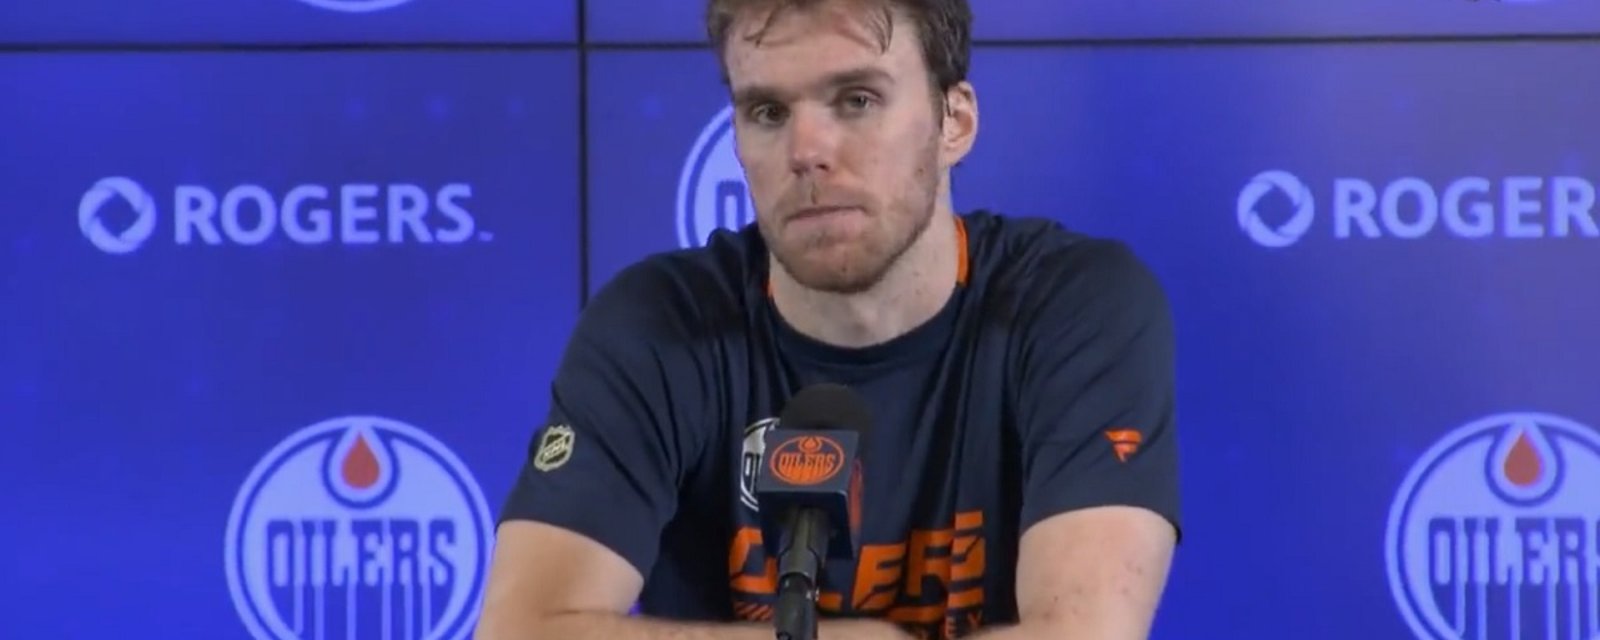 McDavid comments on one of the most frustrating regular season losses of his career.